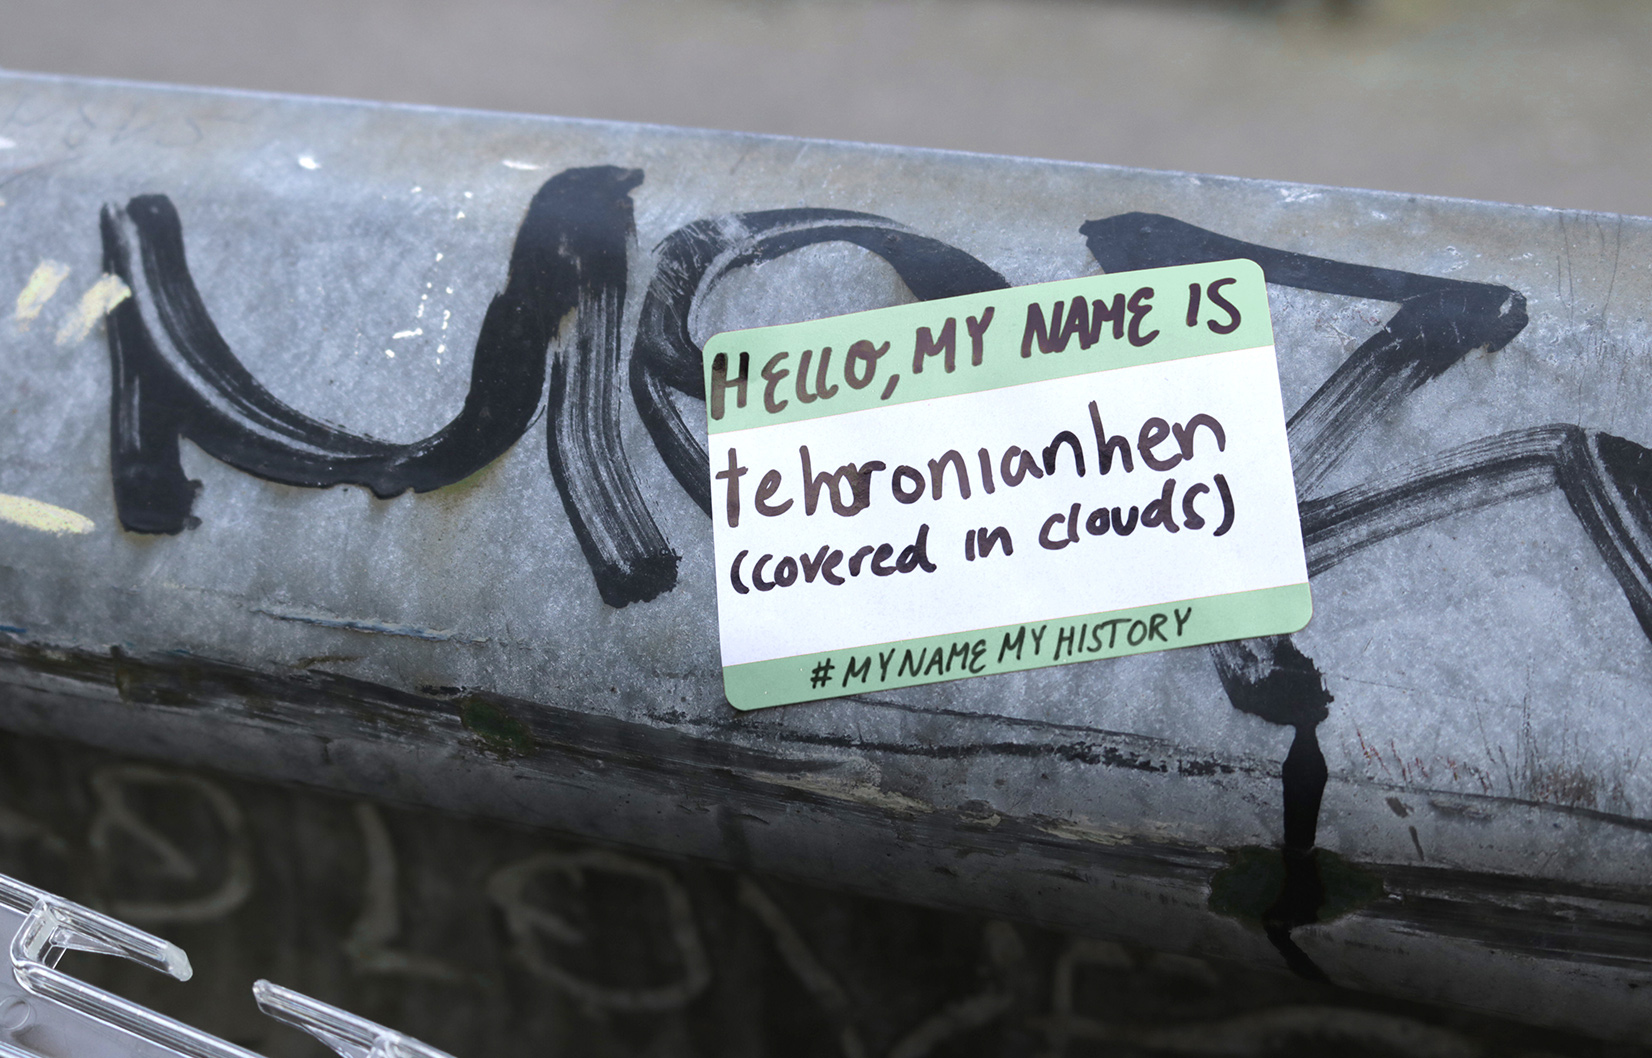 A hello my name is guerilla campaign sticker placed on a railing. The name reads Tehoronianhen.